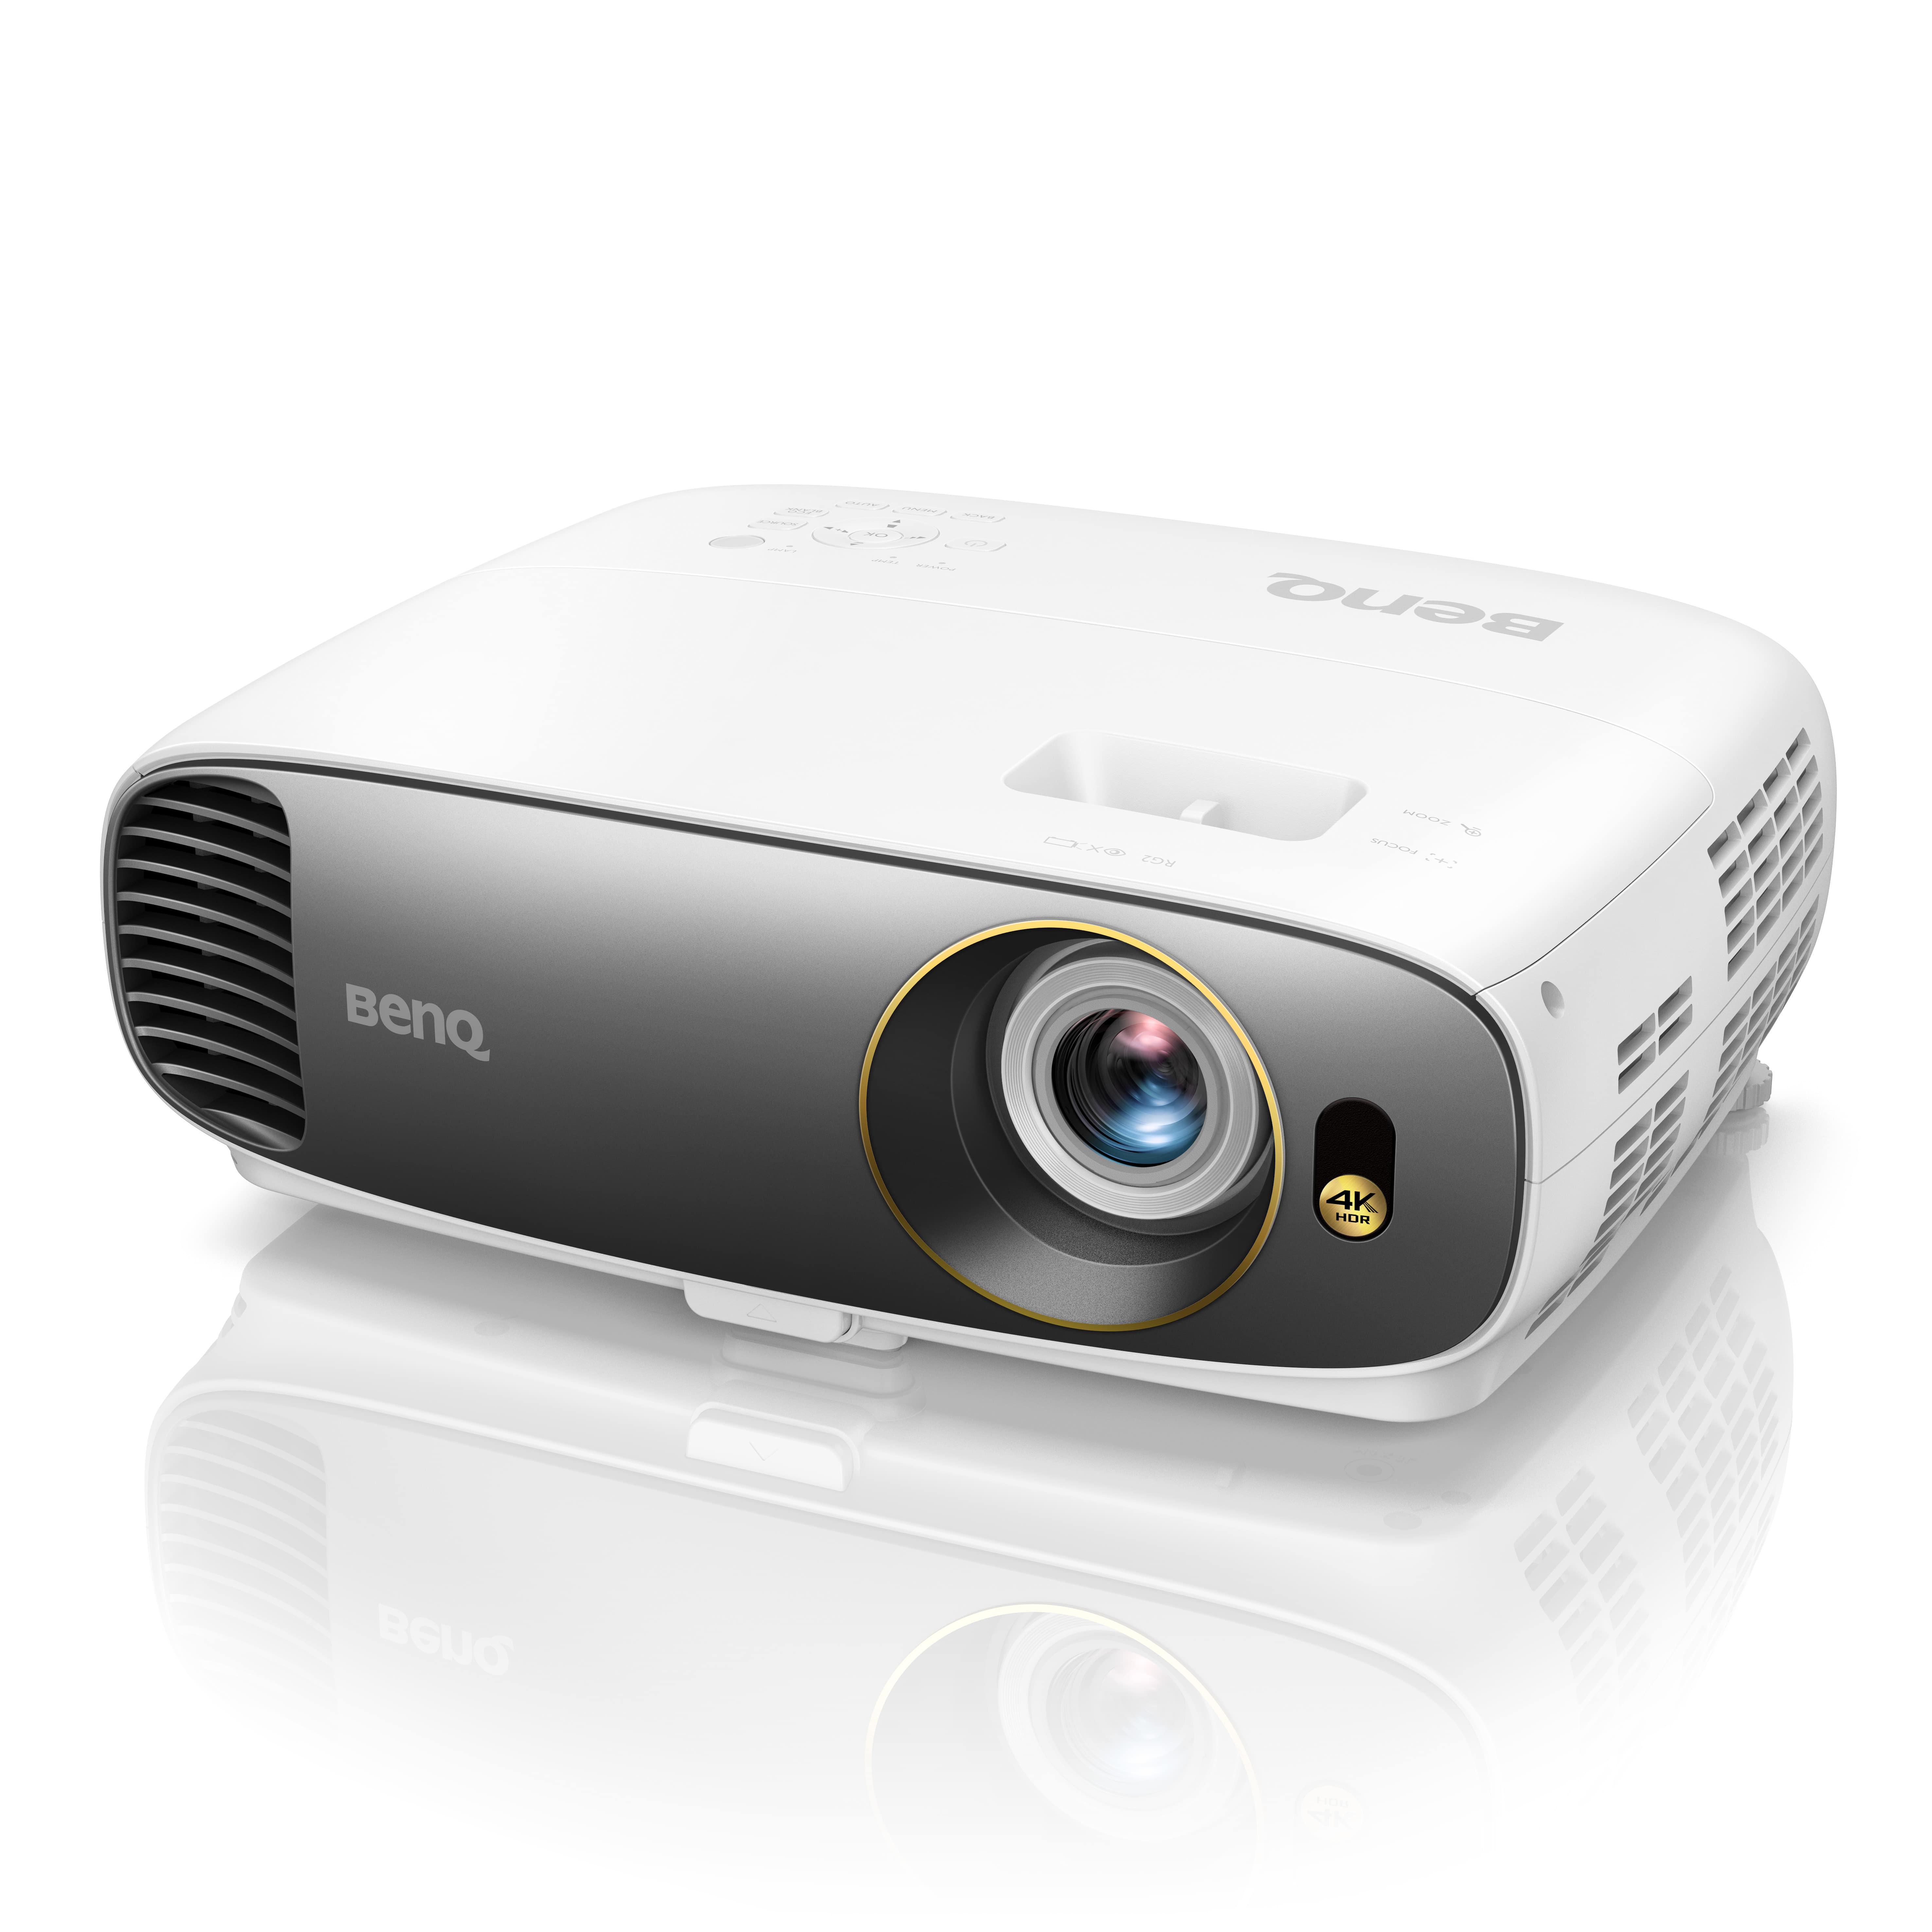 BenQ, the No. 1 4K Projector Brand, Announces the Launch of W1700M and TK800M for Home Cinema and Sports Segment